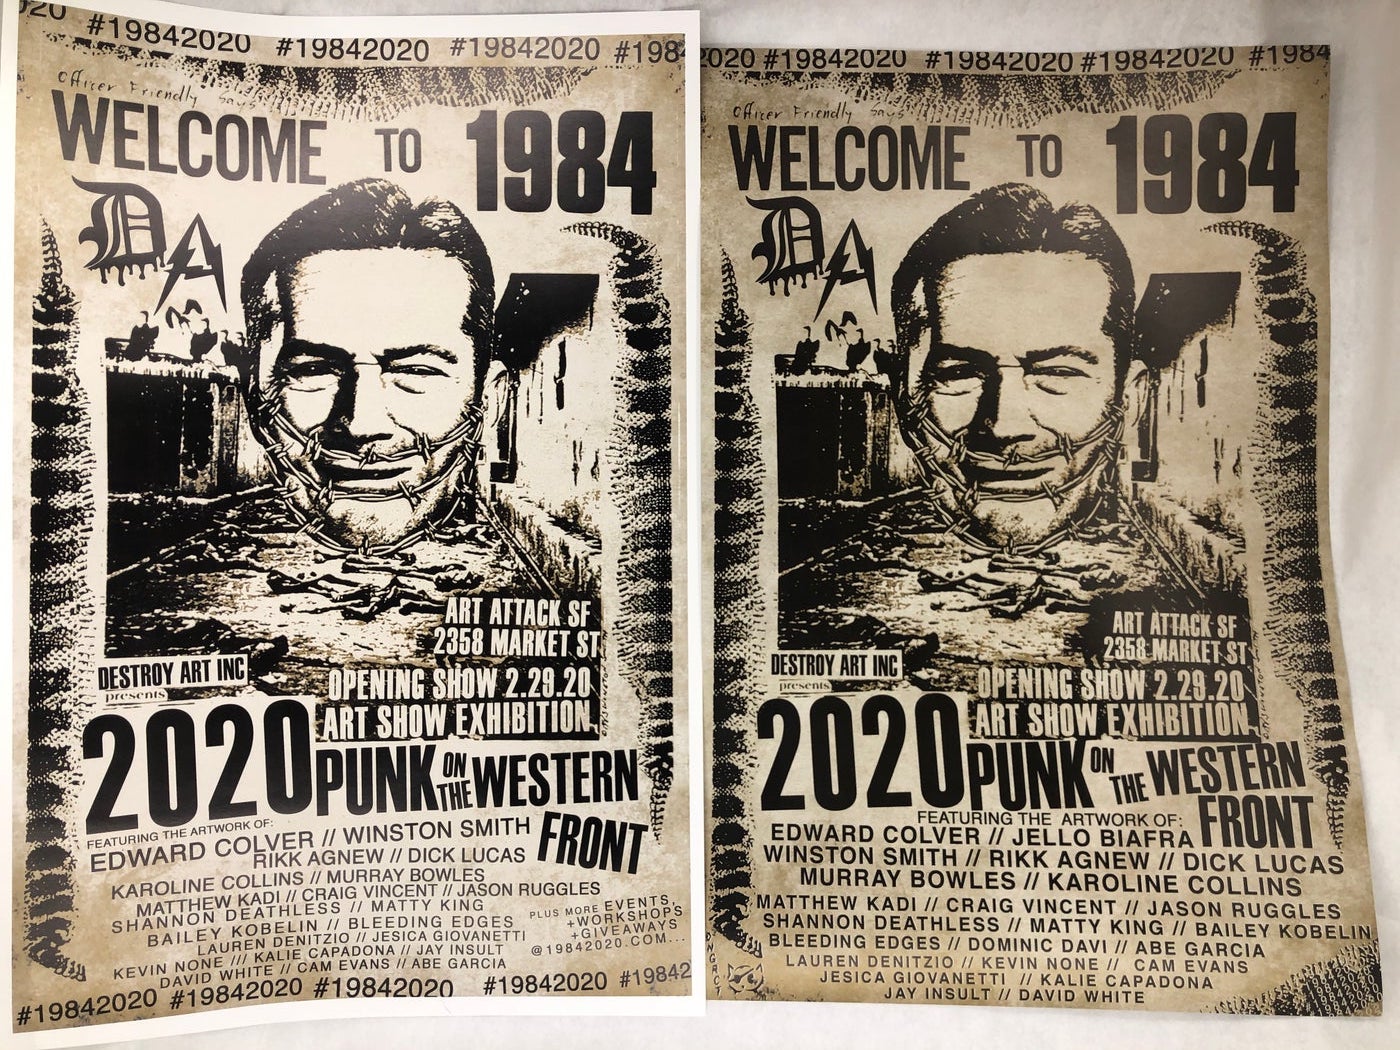 Welcome to 1984//2020: Punk on the Western Front" Art Exhibition Print (2020)